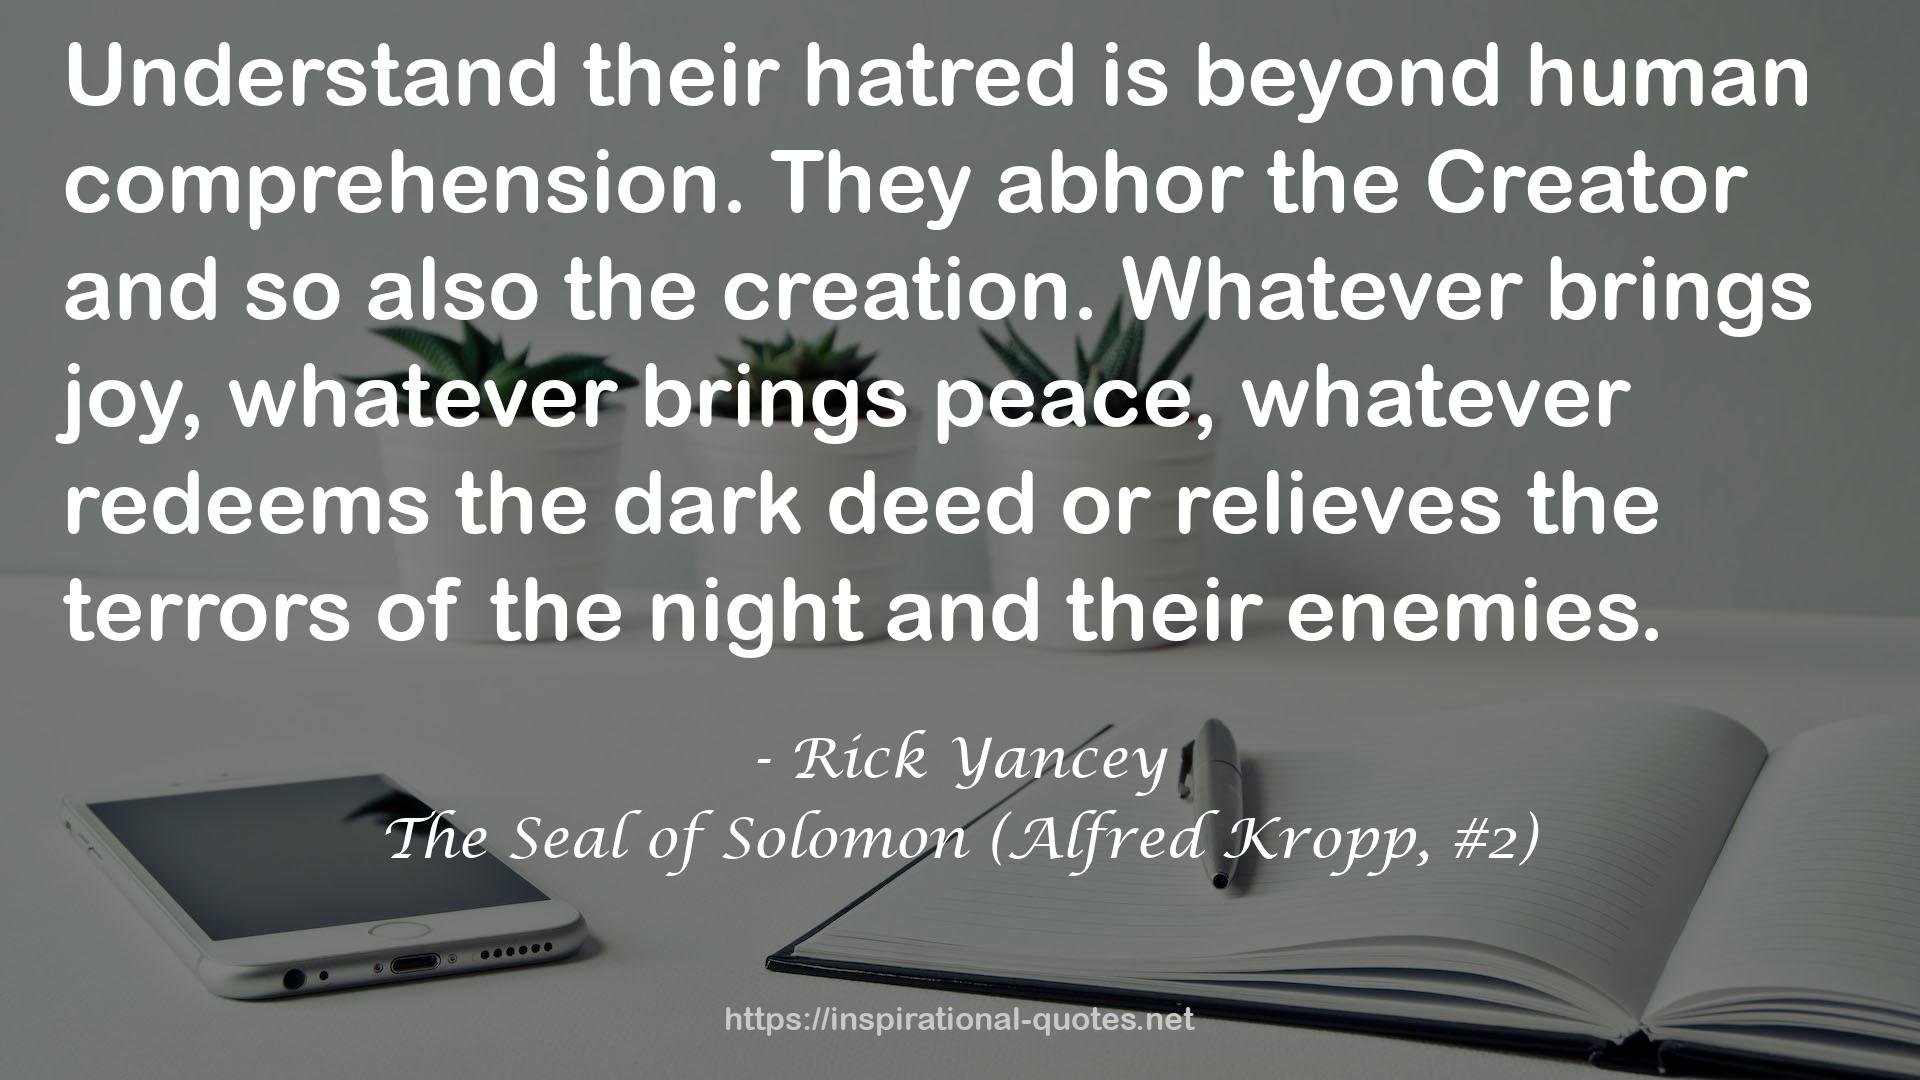 The Seal of Solomon (Alfred Kropp, #2) QUOTES